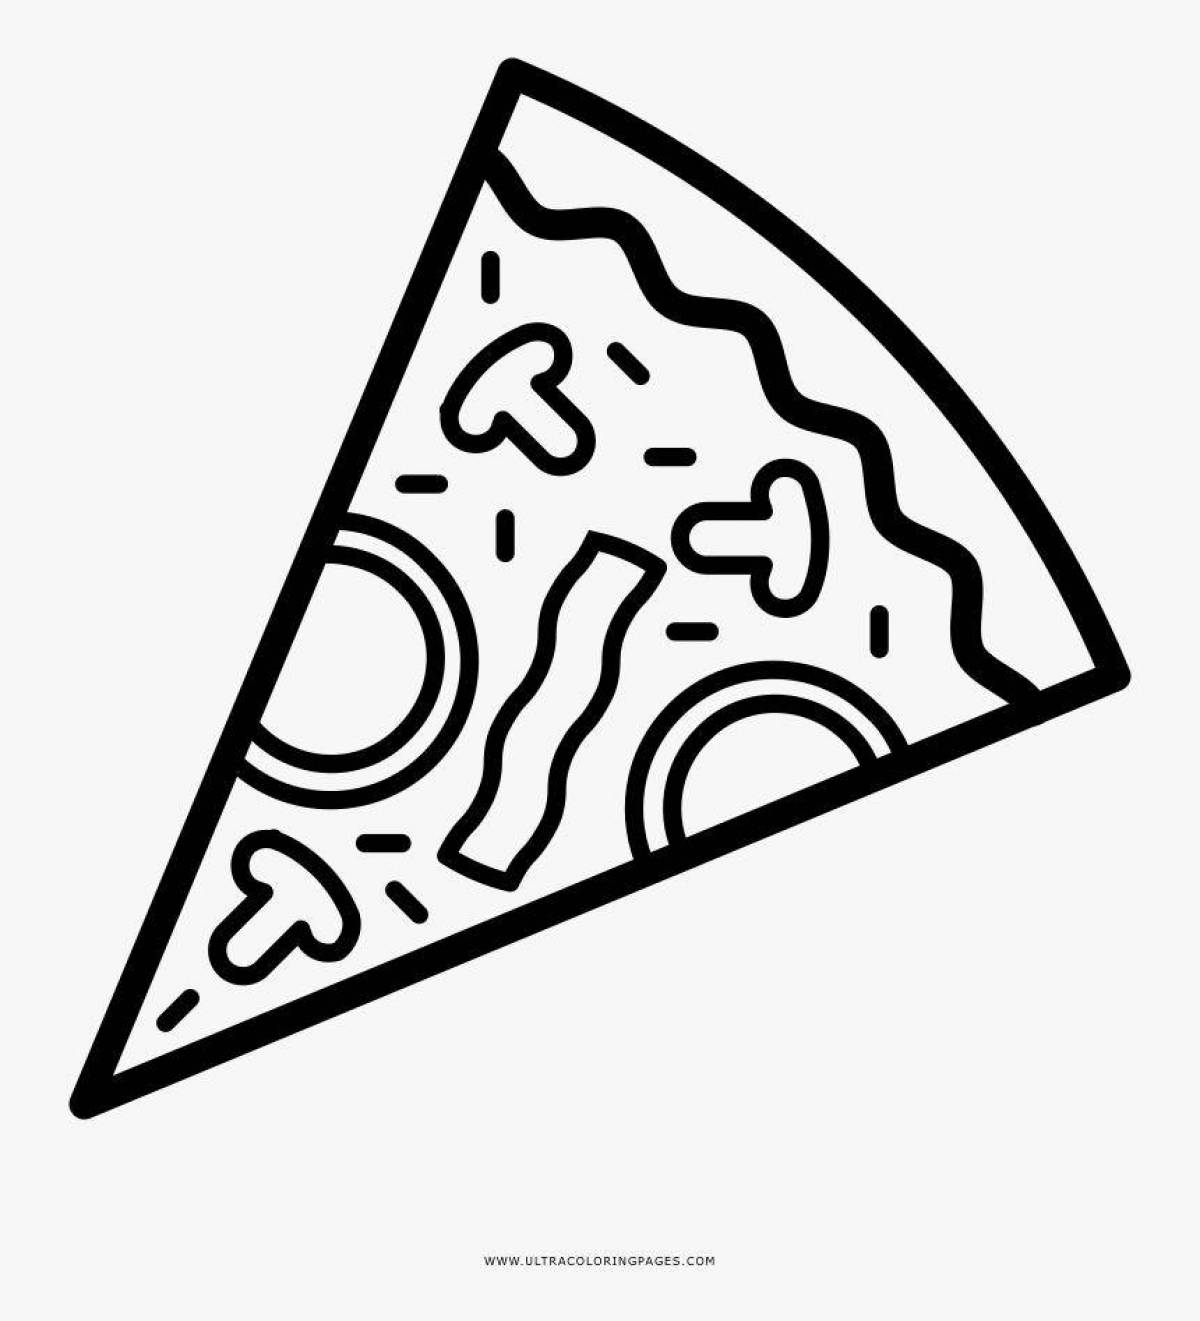 Spicy pizza slice coloring